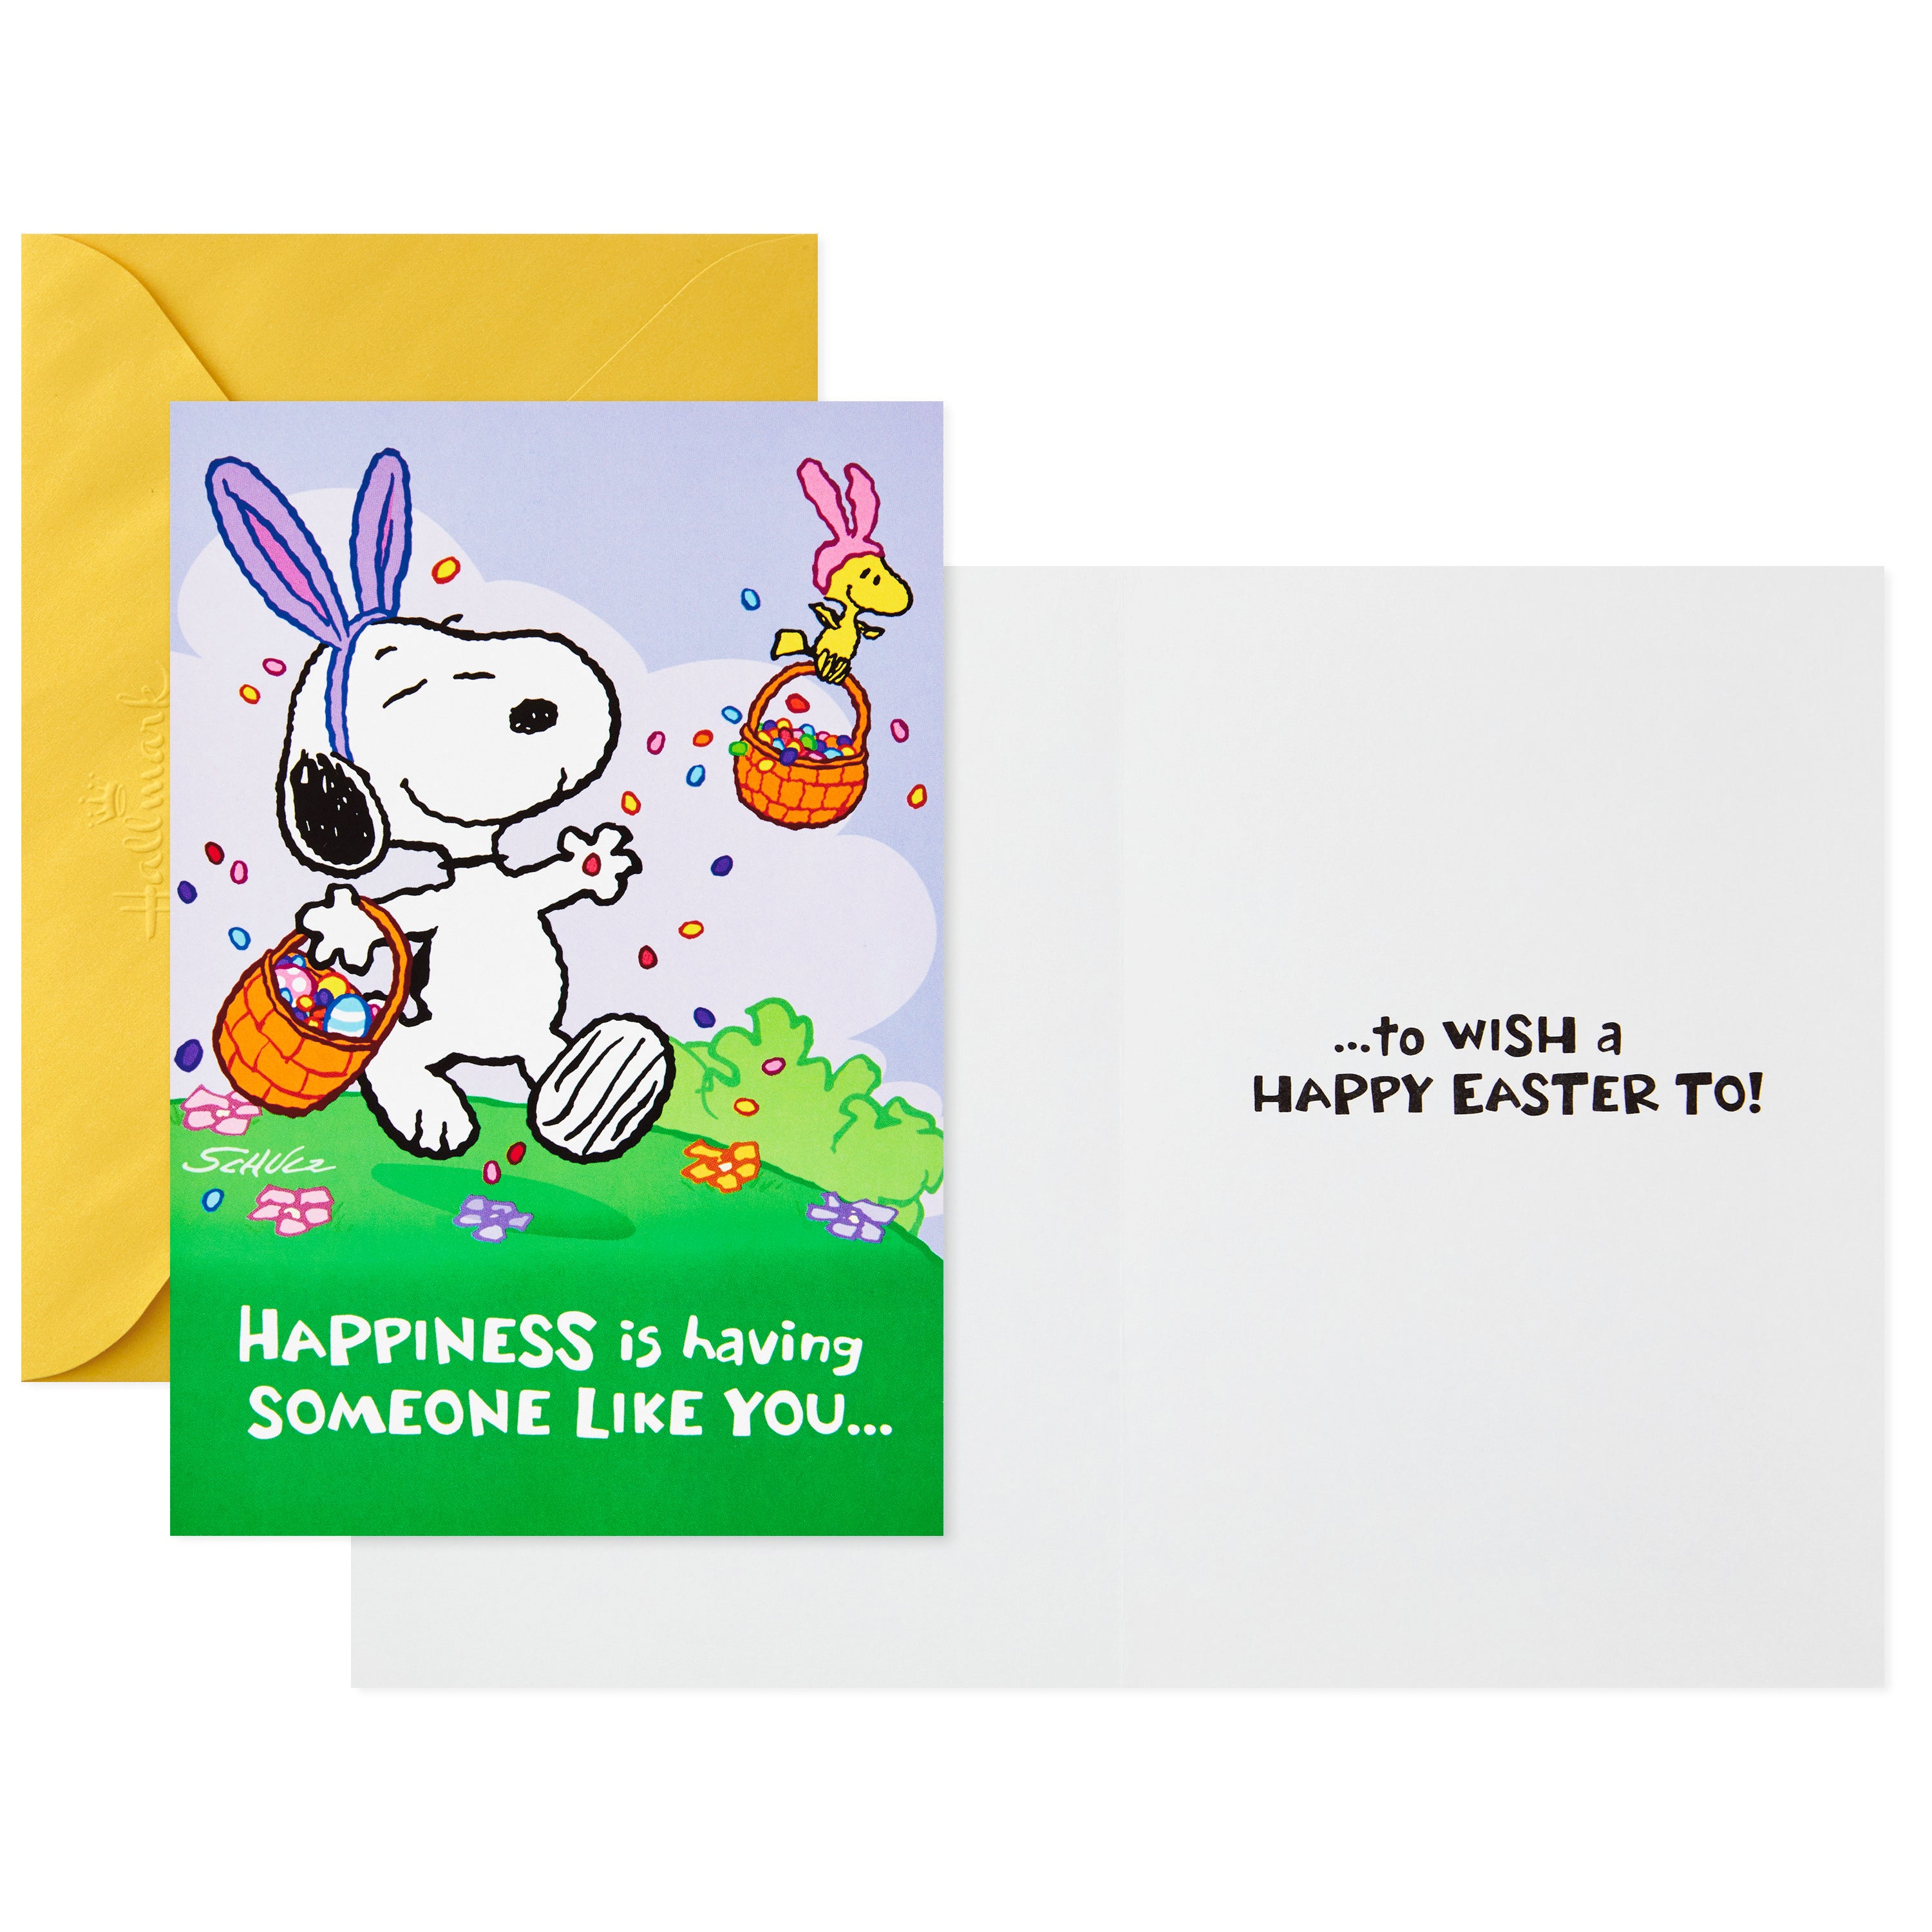 Peanuts Pack of Easter Cards, Snoopy Jelly Beans (6 Cards with Envelopes)